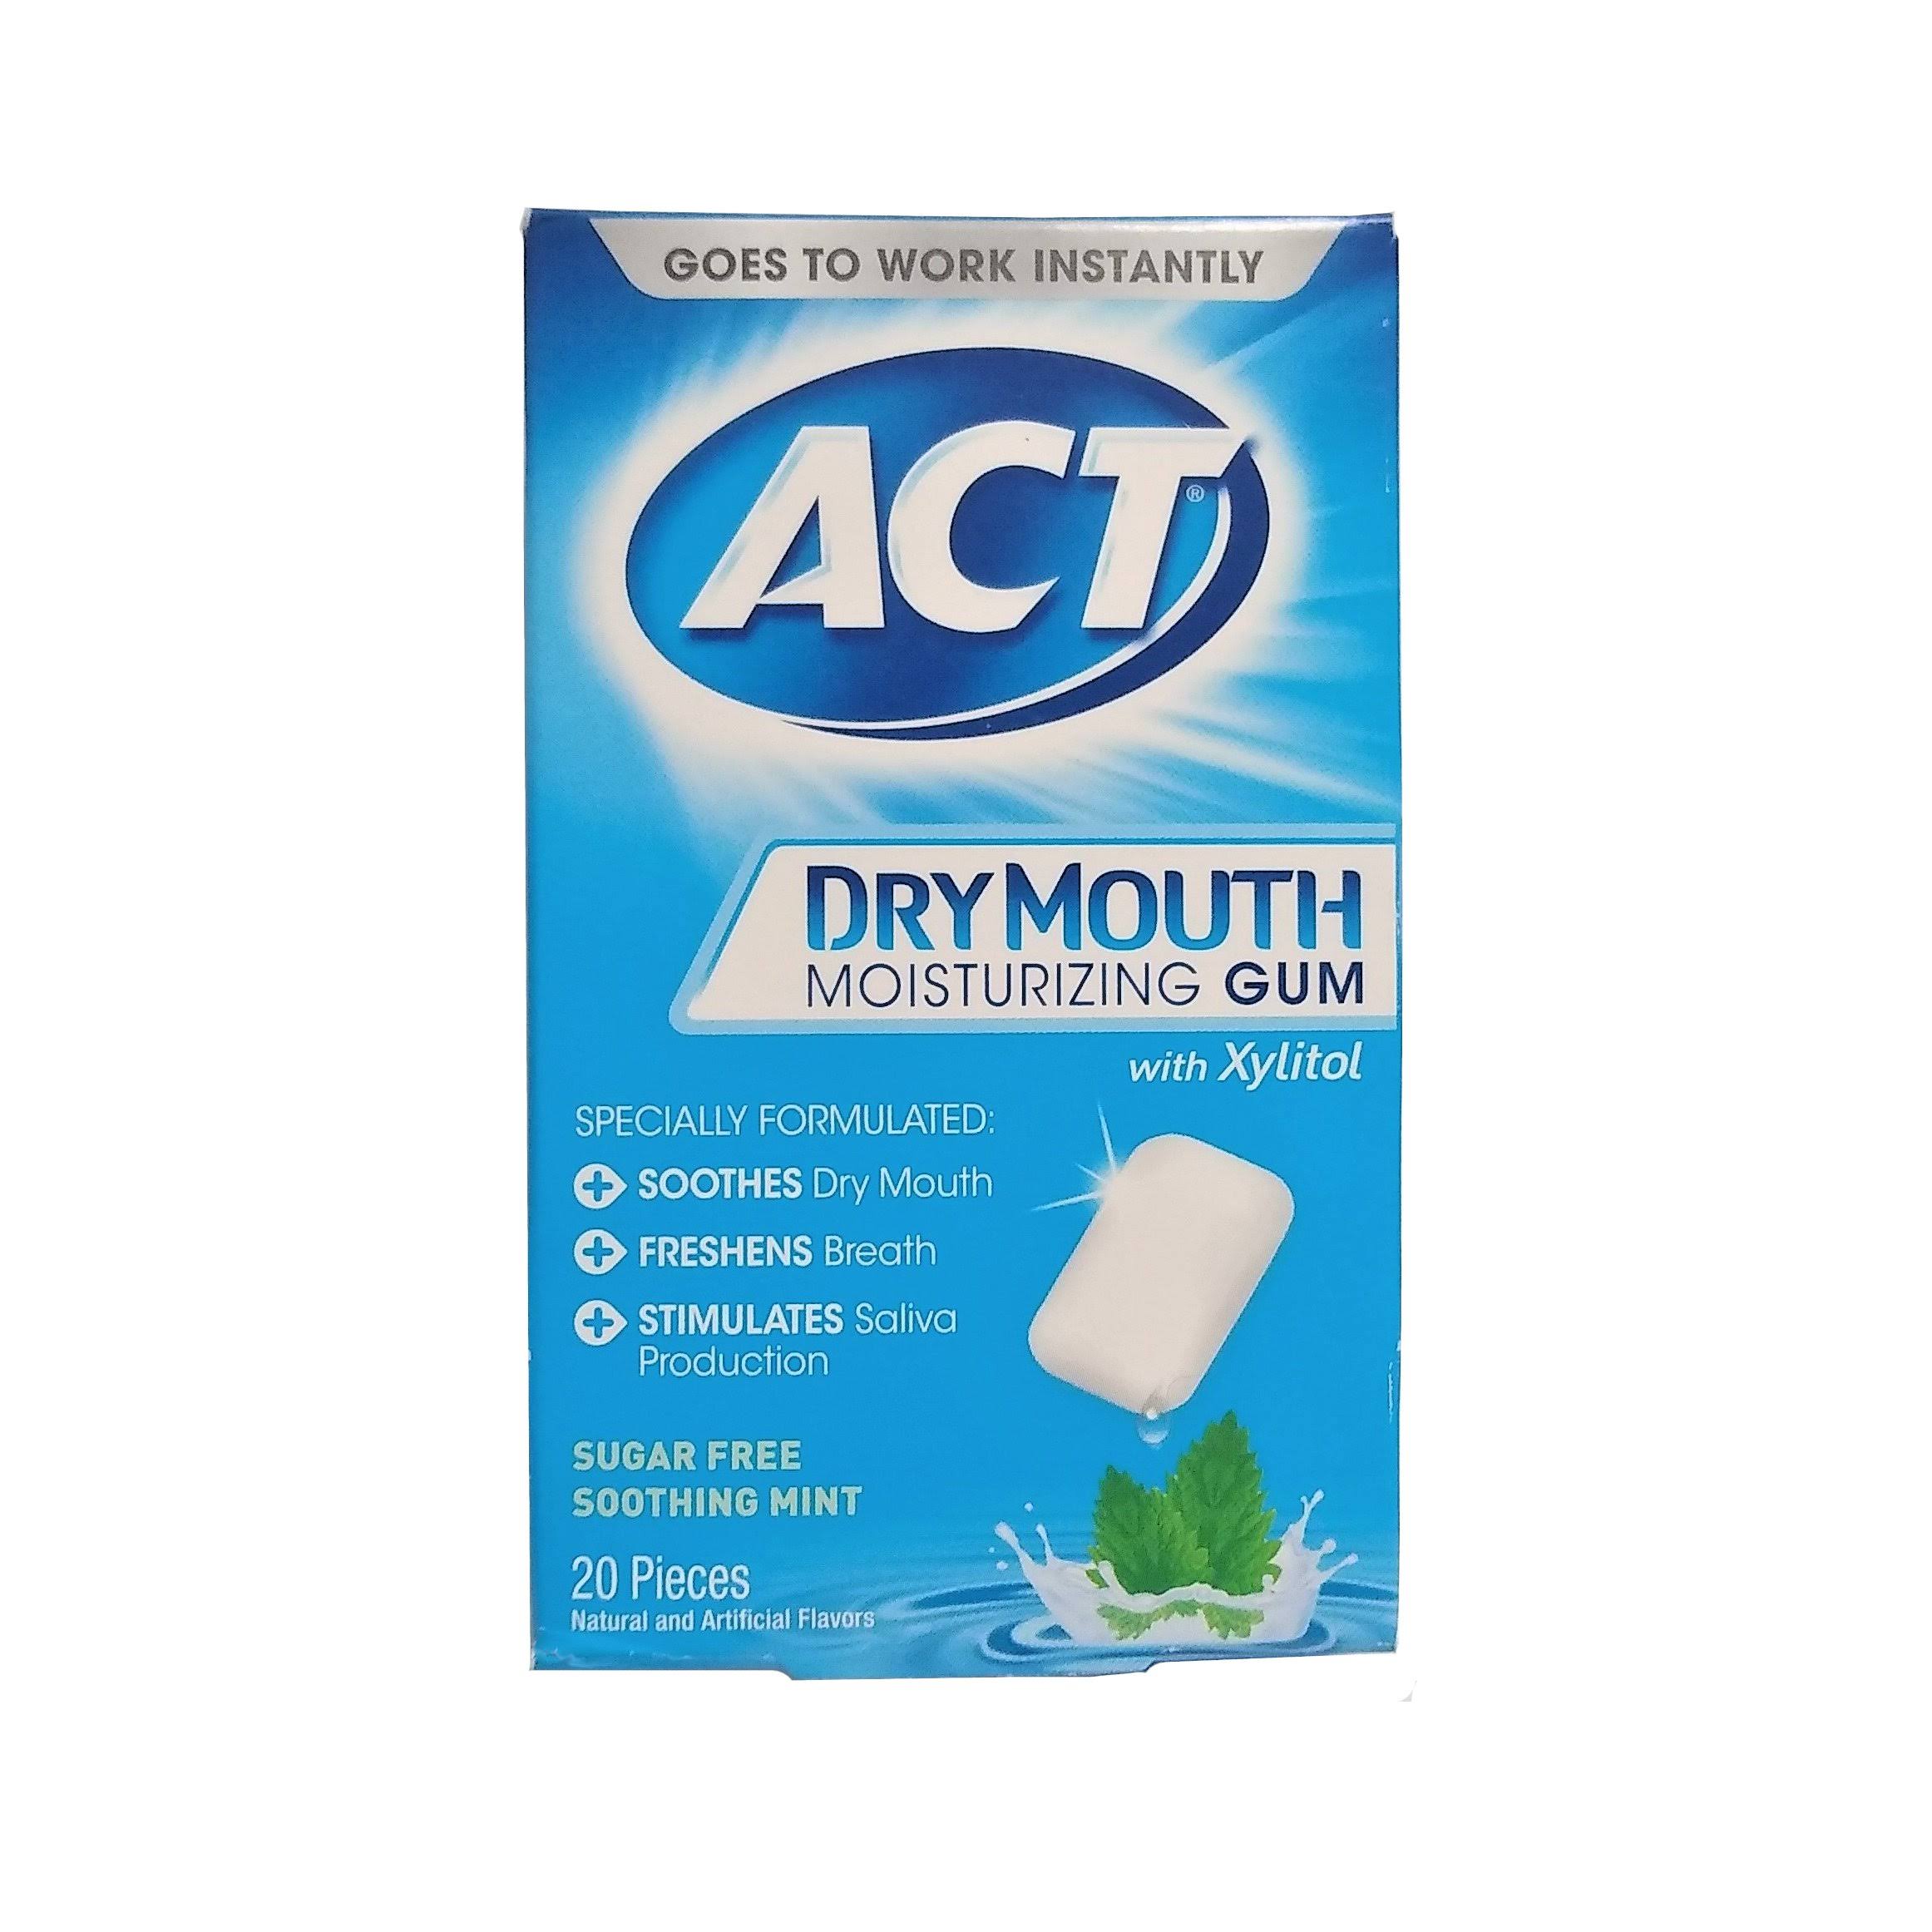 ACT Dry Mouth Moisturizing Gum 20 Pieces With Xylitol Sugar Free Soothing Mint